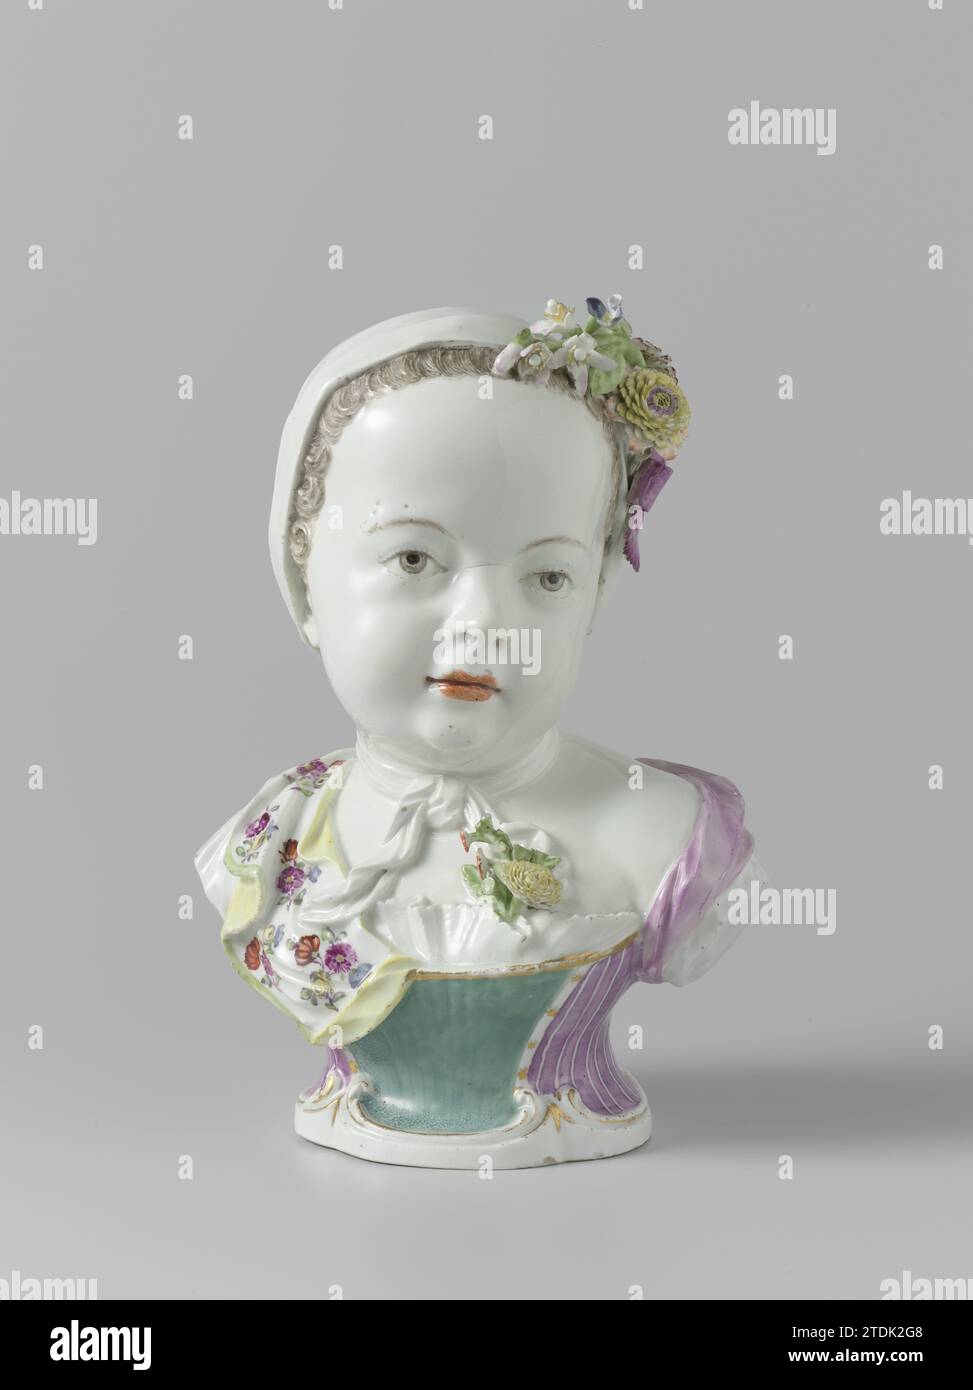 Two Busts of Children, Meissener Porcelain Manufaktur, c. 1750 - c. 1760 Figure of painted porcelain. The figure proposes a children's bust on a pedestal in the form of a four-pass with a gilded rocaille ornament. The child has used his head to the right. The clothing consists of a turquoise straitjacket with a golden border and a violet jacket with white stripes and a white border, on which golden stars. On her chest there is a riger of flowers in relief. The figure is not marked. Float porcelain Figure of painted porcelain. The figure proposes a children's bust on a pedestal in the form of a Stock Photo